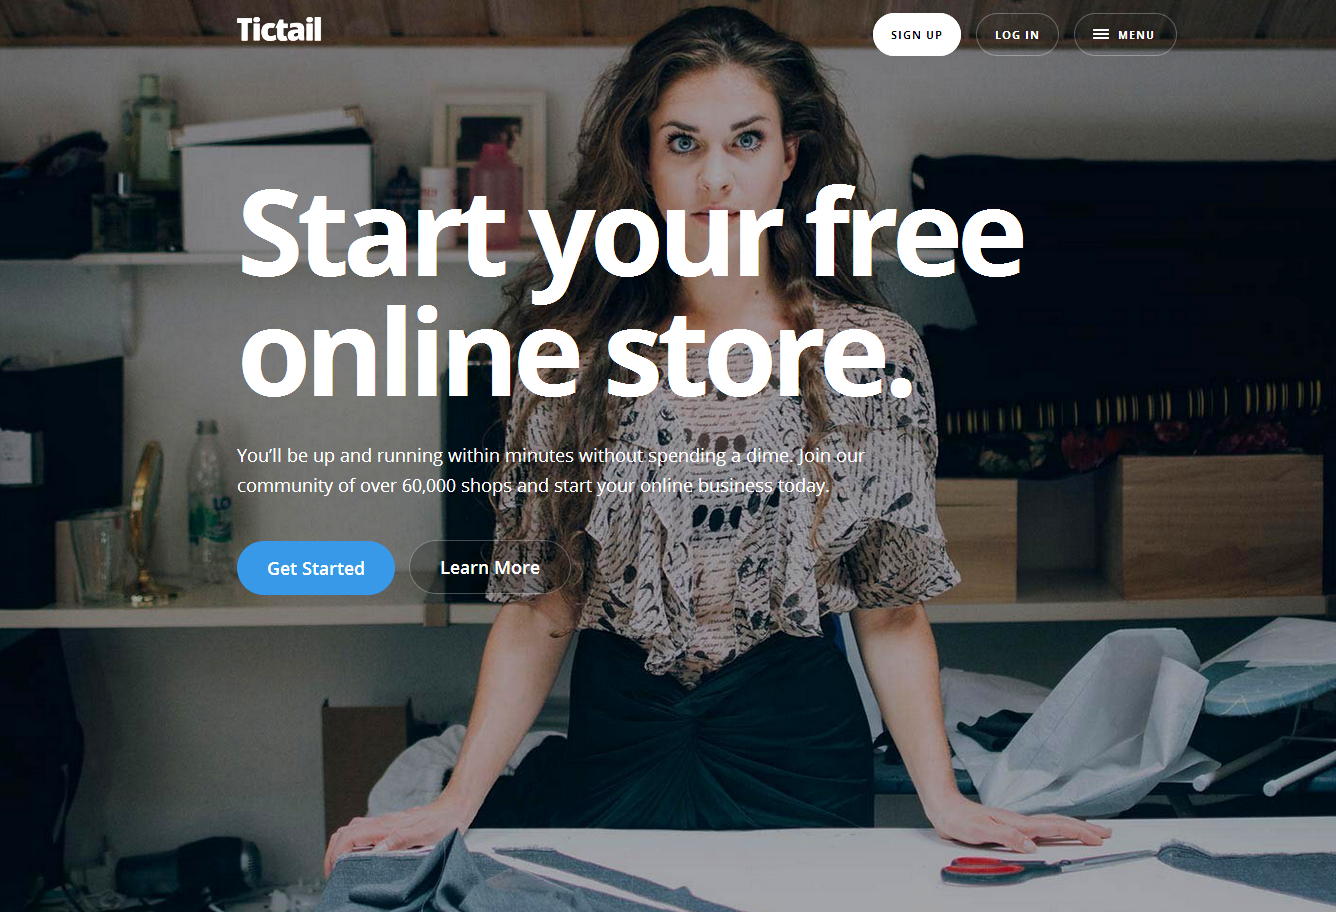 http://www.smallbusines.co.uk/2014/12/tictail-start-your-free-online-store.html